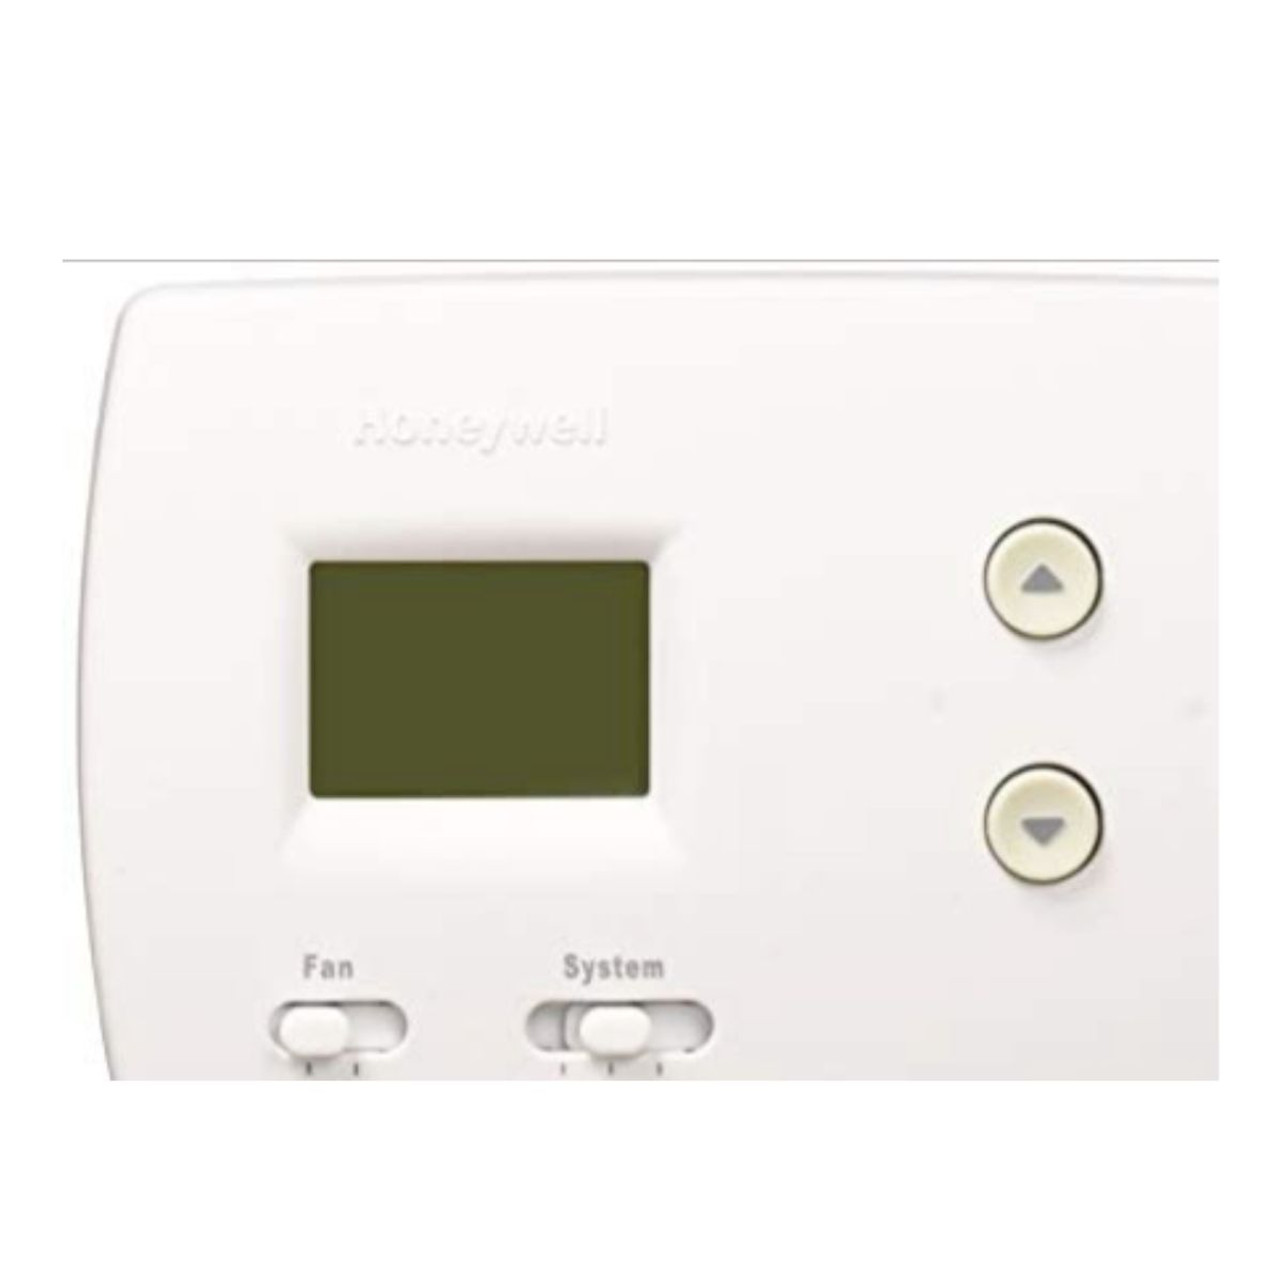 Honeywell Non-Programmable Digital Thermostat (2-Pack) product image